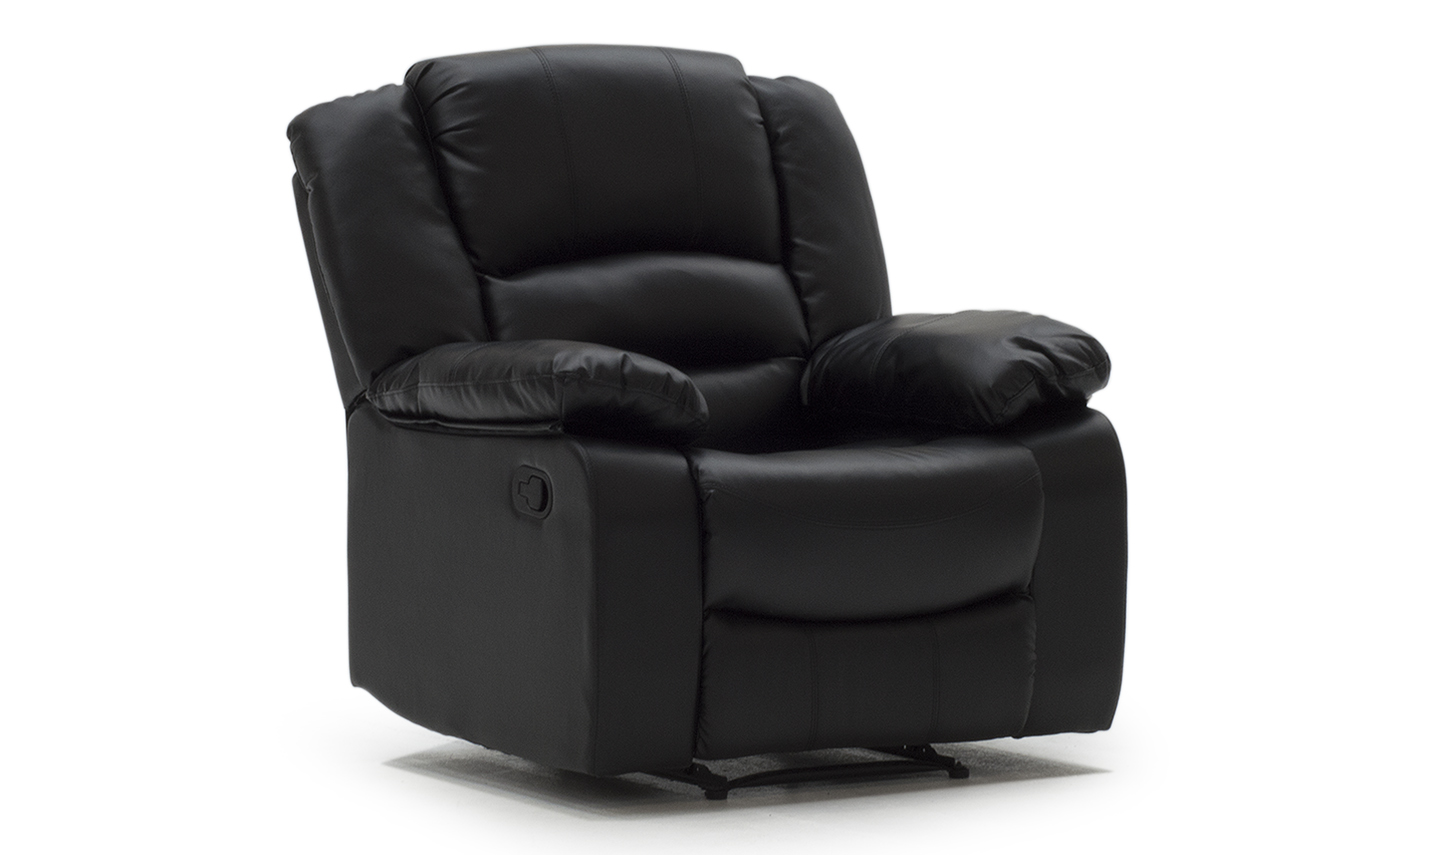 Barletto Black 1 Seater Recliner Chair